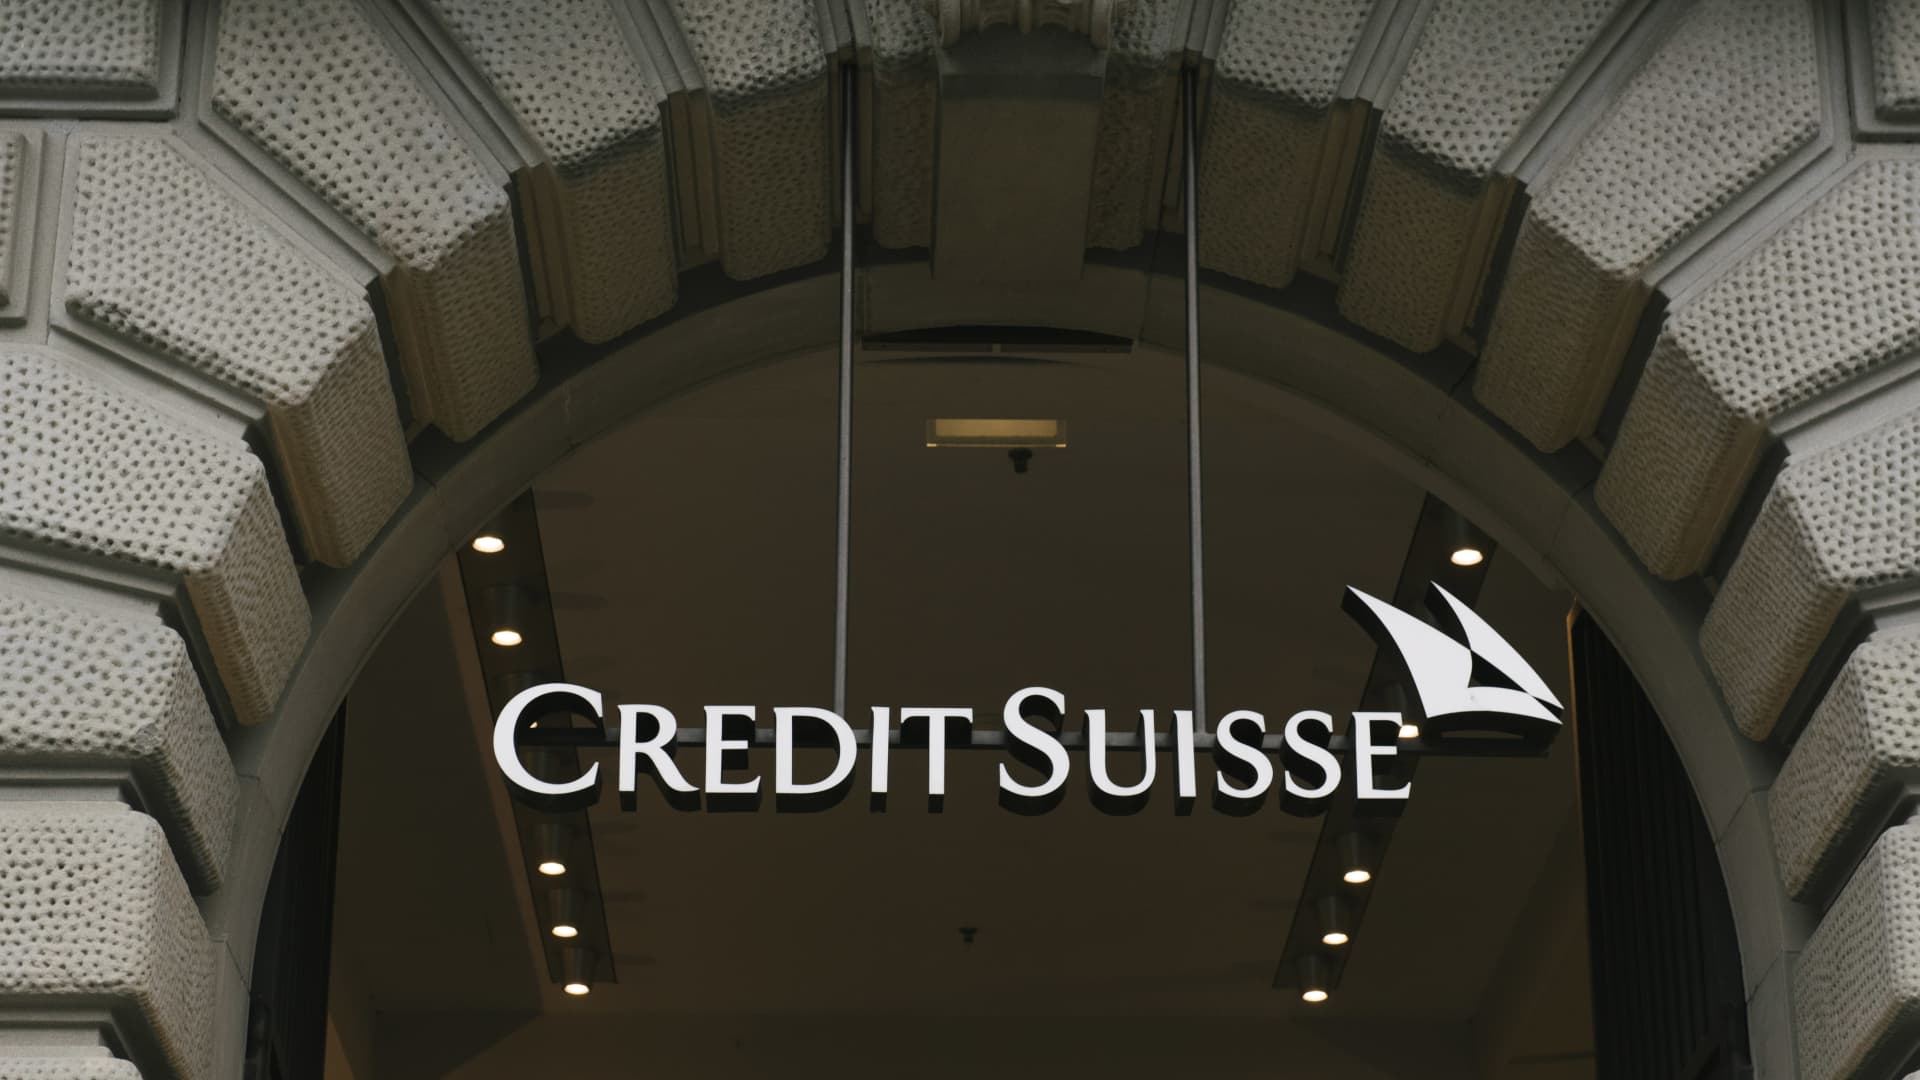 One of the biggest challenges for Credit Suisse this quarter was litigation costs.